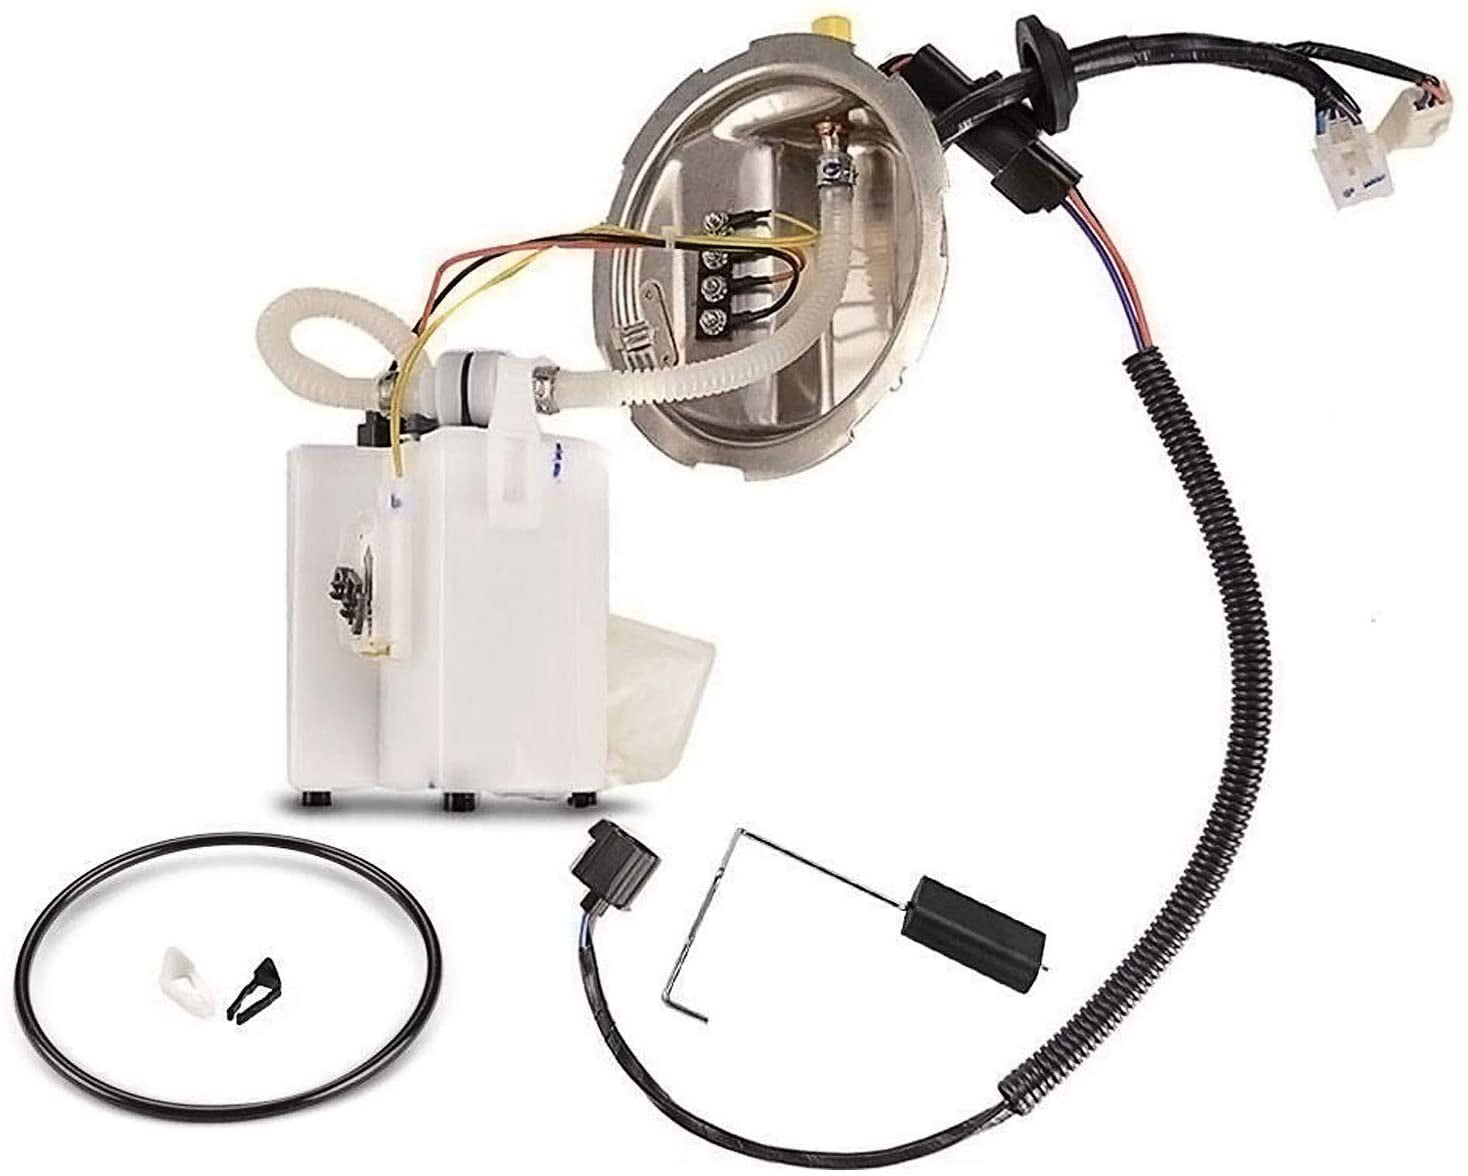 New Fuel Pump & Sender Assembly For 1998 Ford Escort Mercury Tracer 2.0L E2197M 